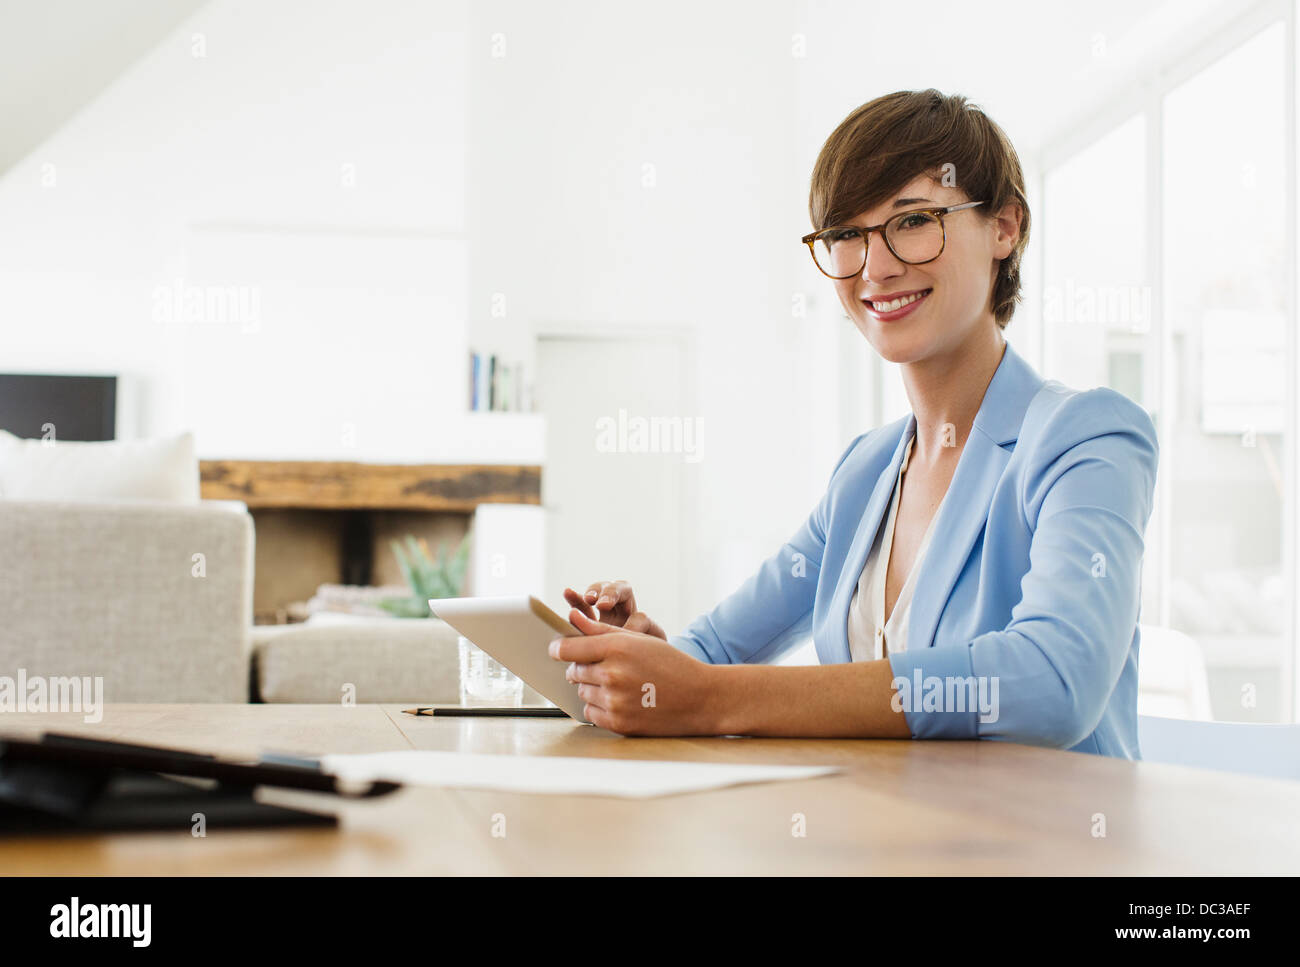 Portrait of smiling woman sitting at table Banque D'Images